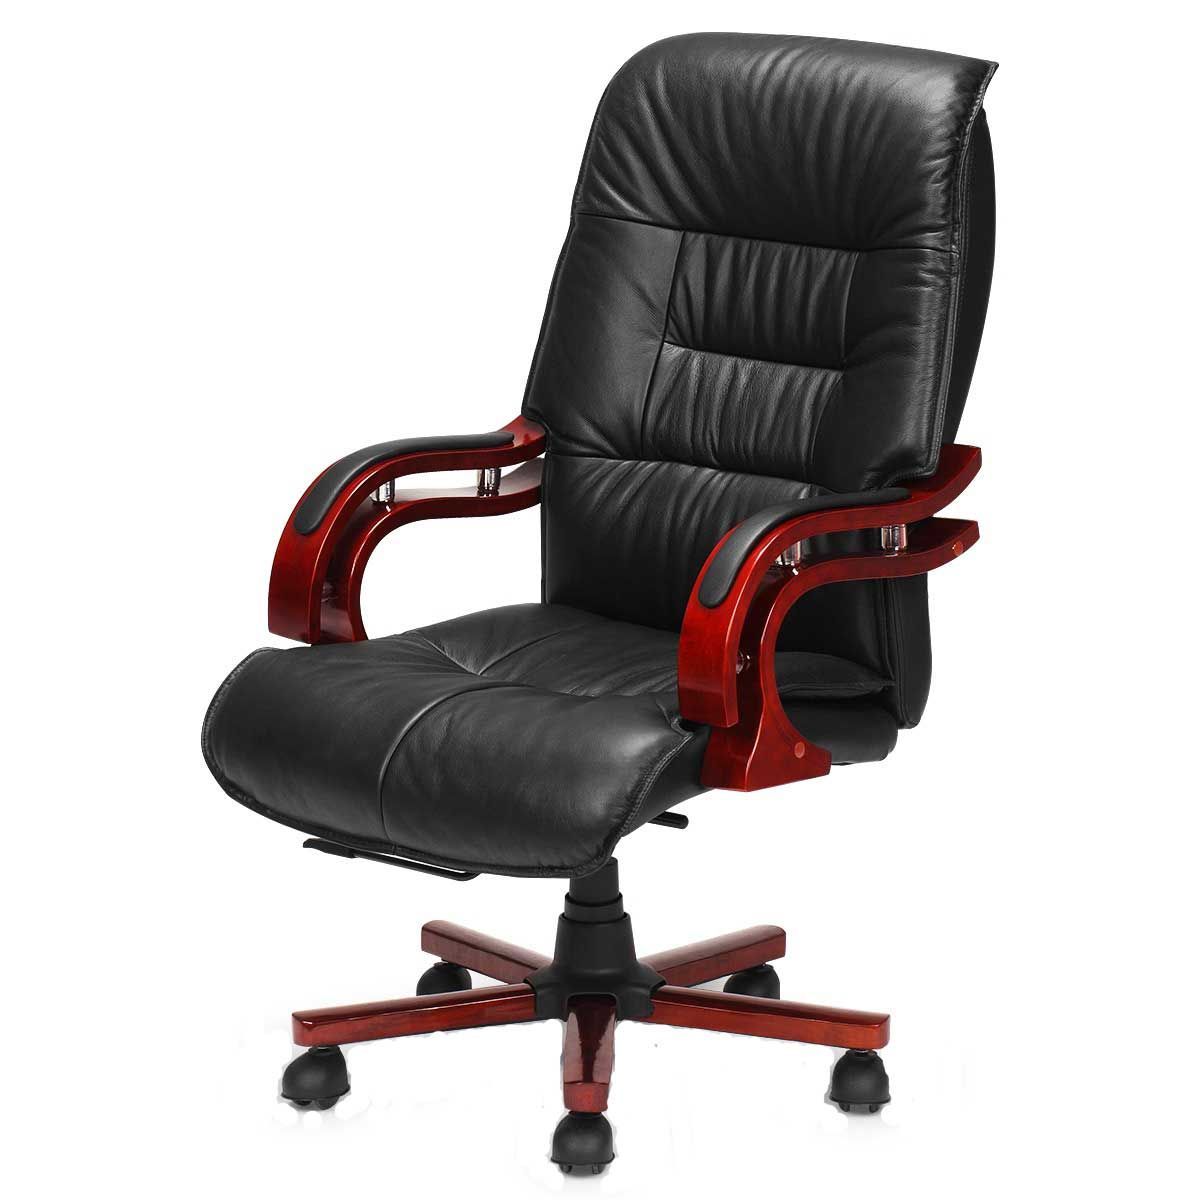 Black Genuine Leather High Back Office Chair | Crazy Sales